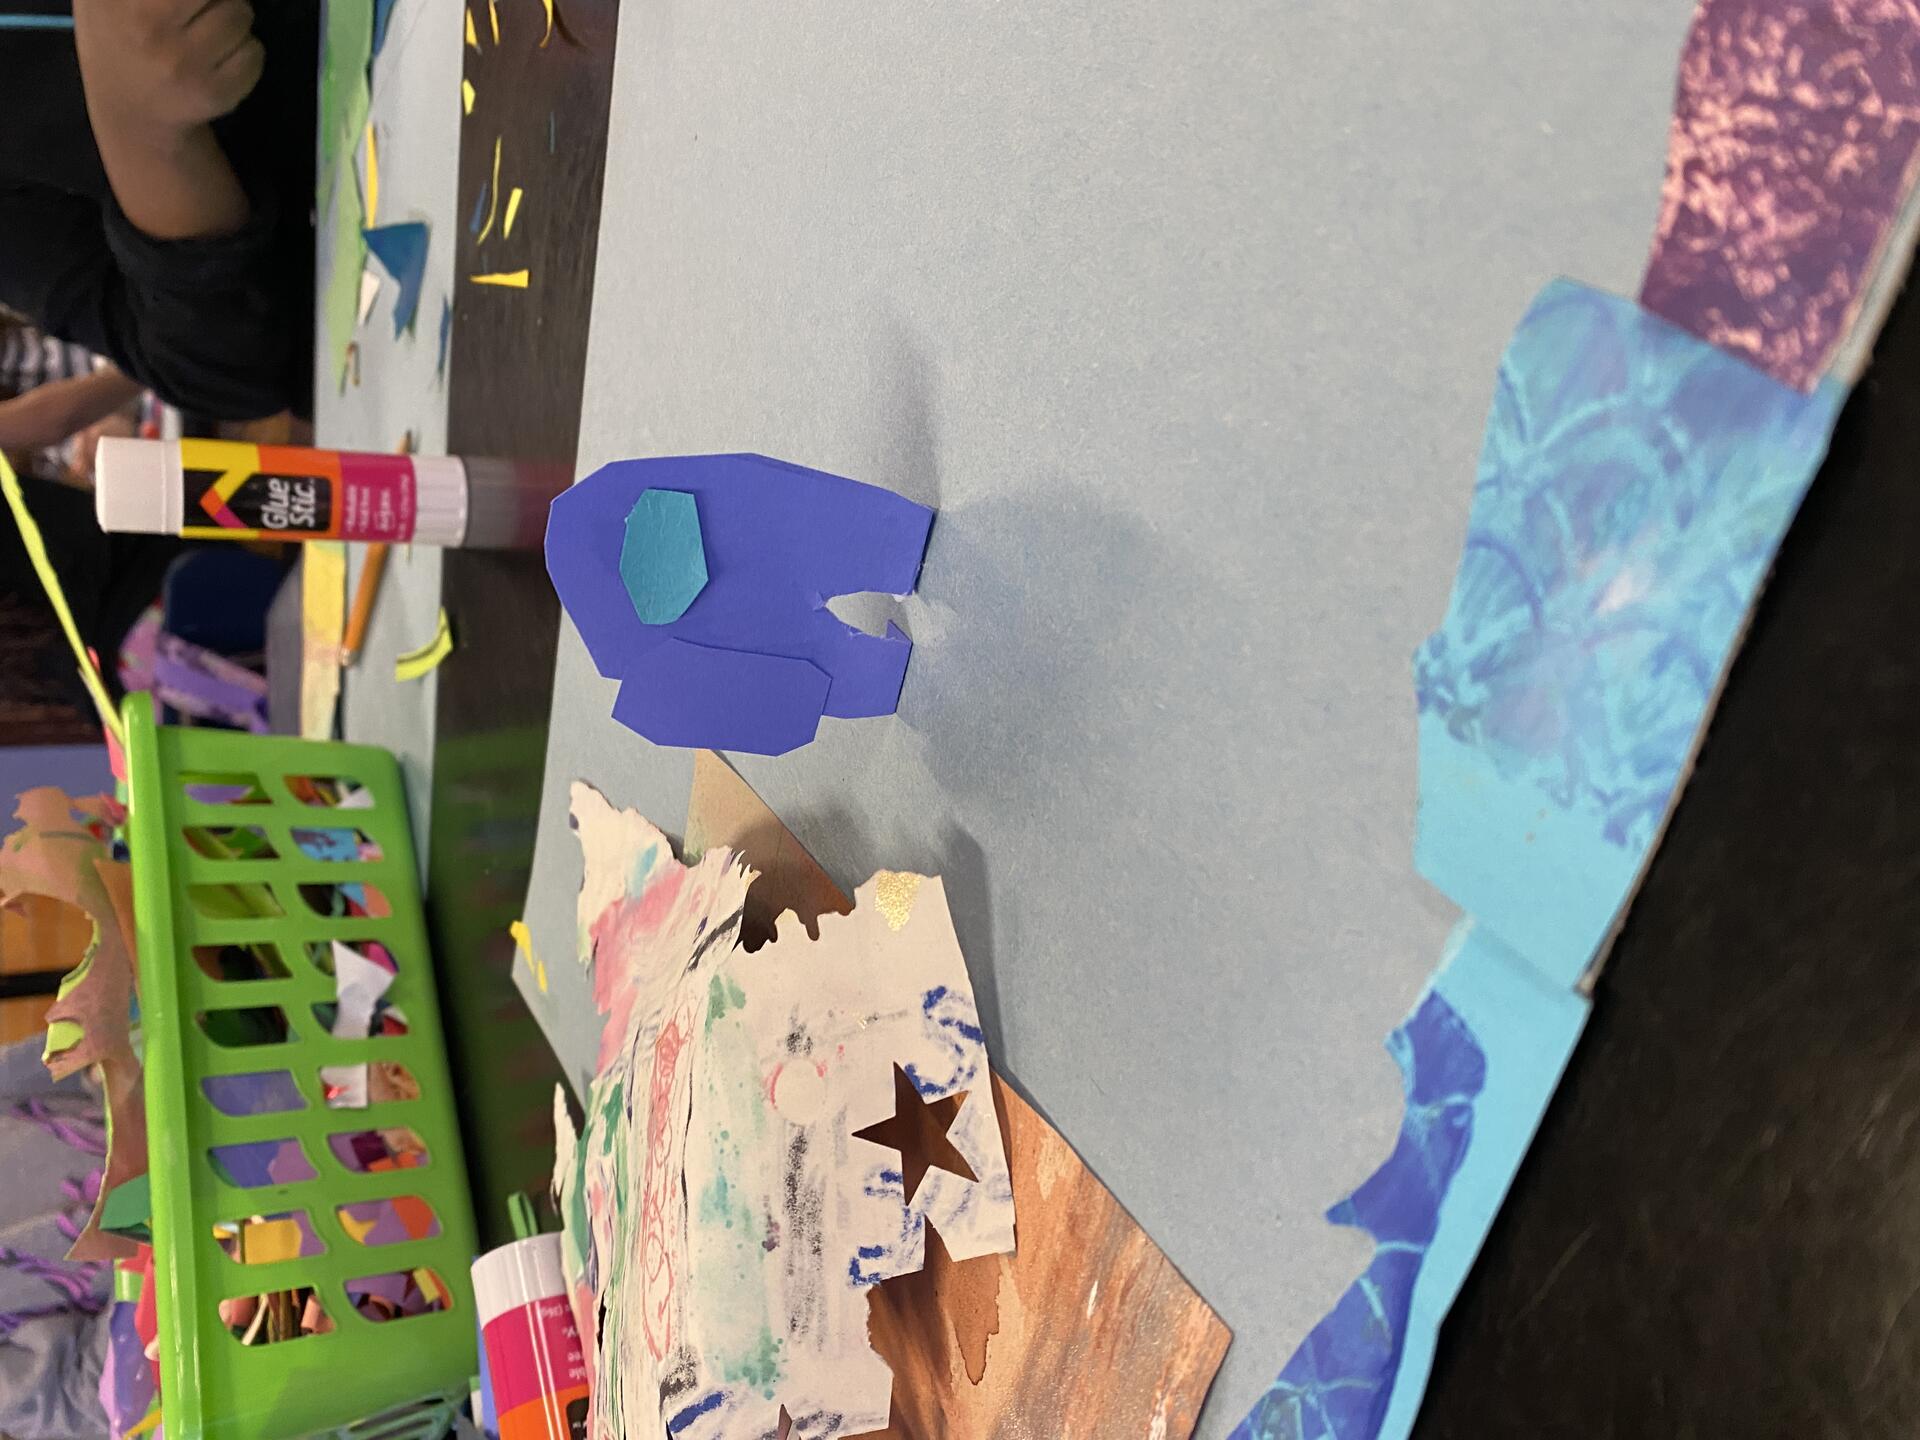 A paper collage cut out of a spaceman from the video game Among Us stands up in a 3D fashion on a student's paper. Seen in the background is a mess of papers and gluesticks.